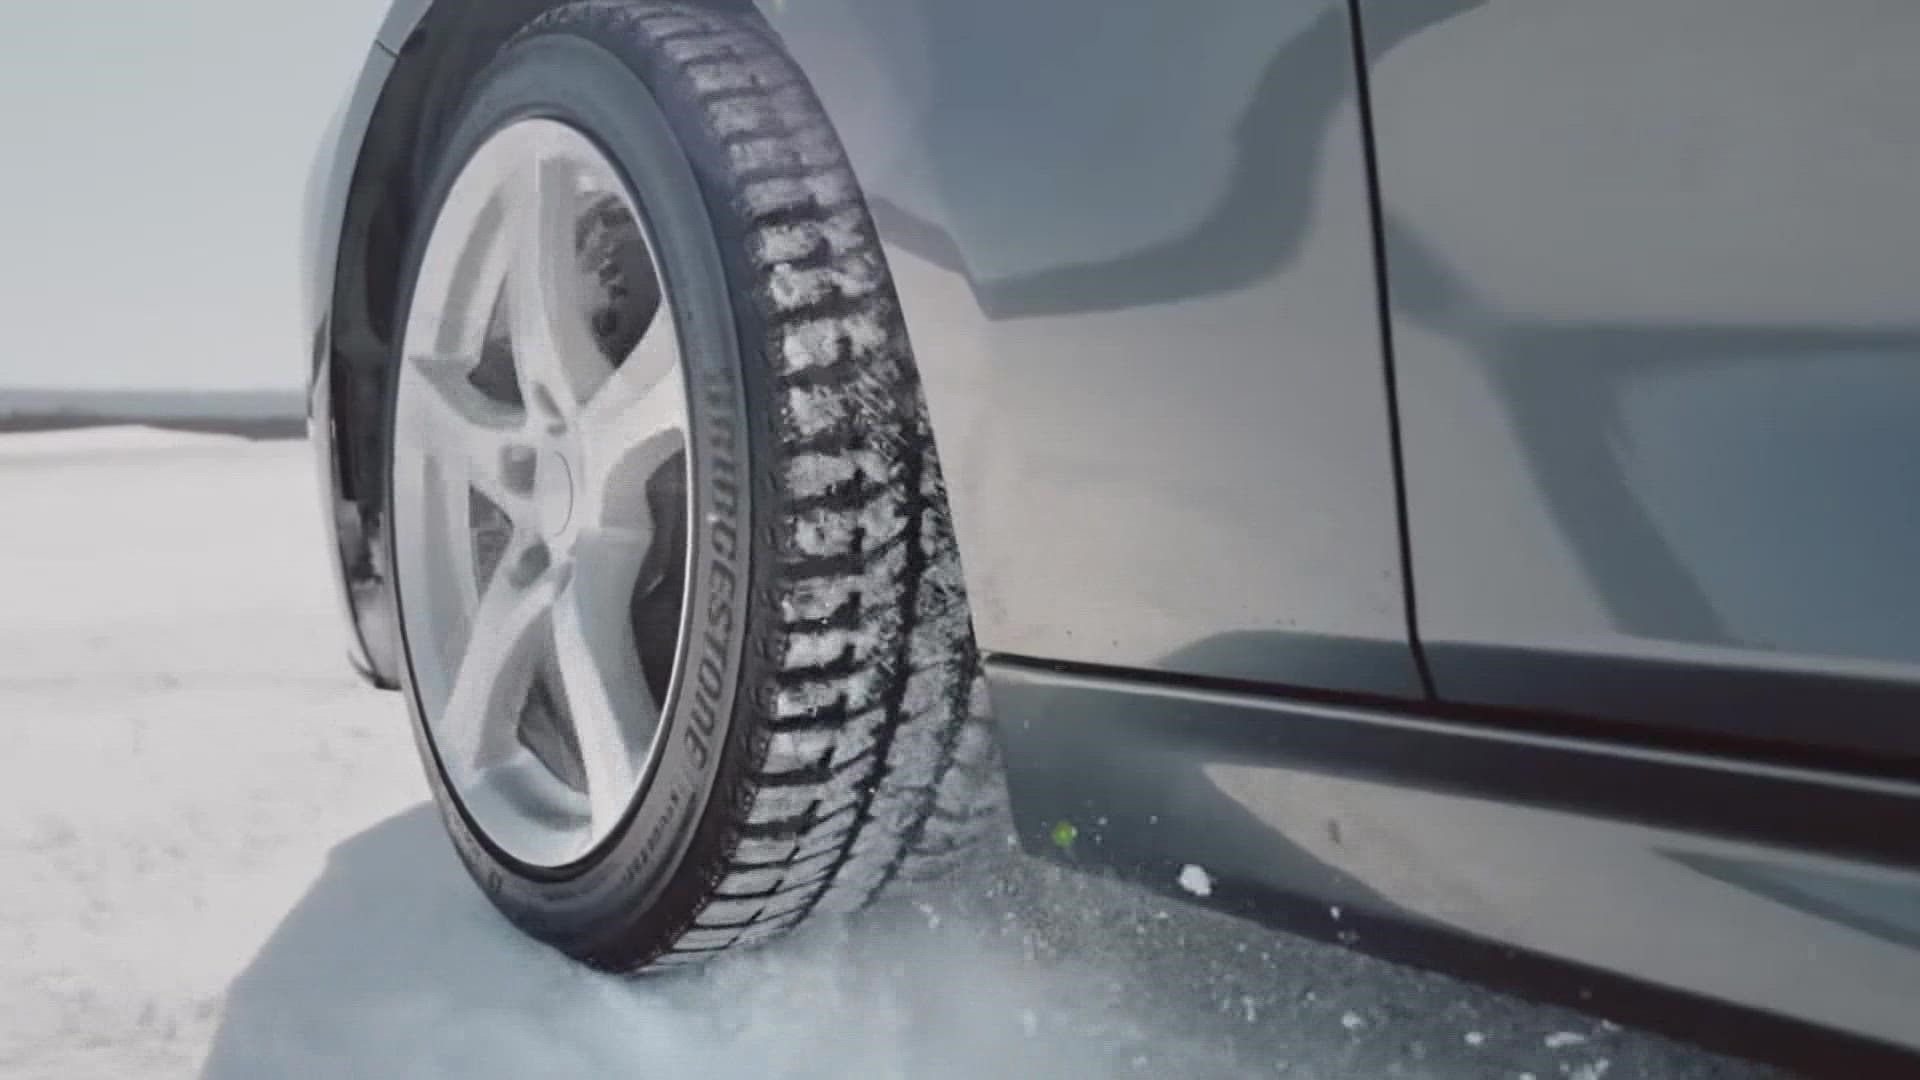 Tires with more tread work best in snowy conditions for traction.